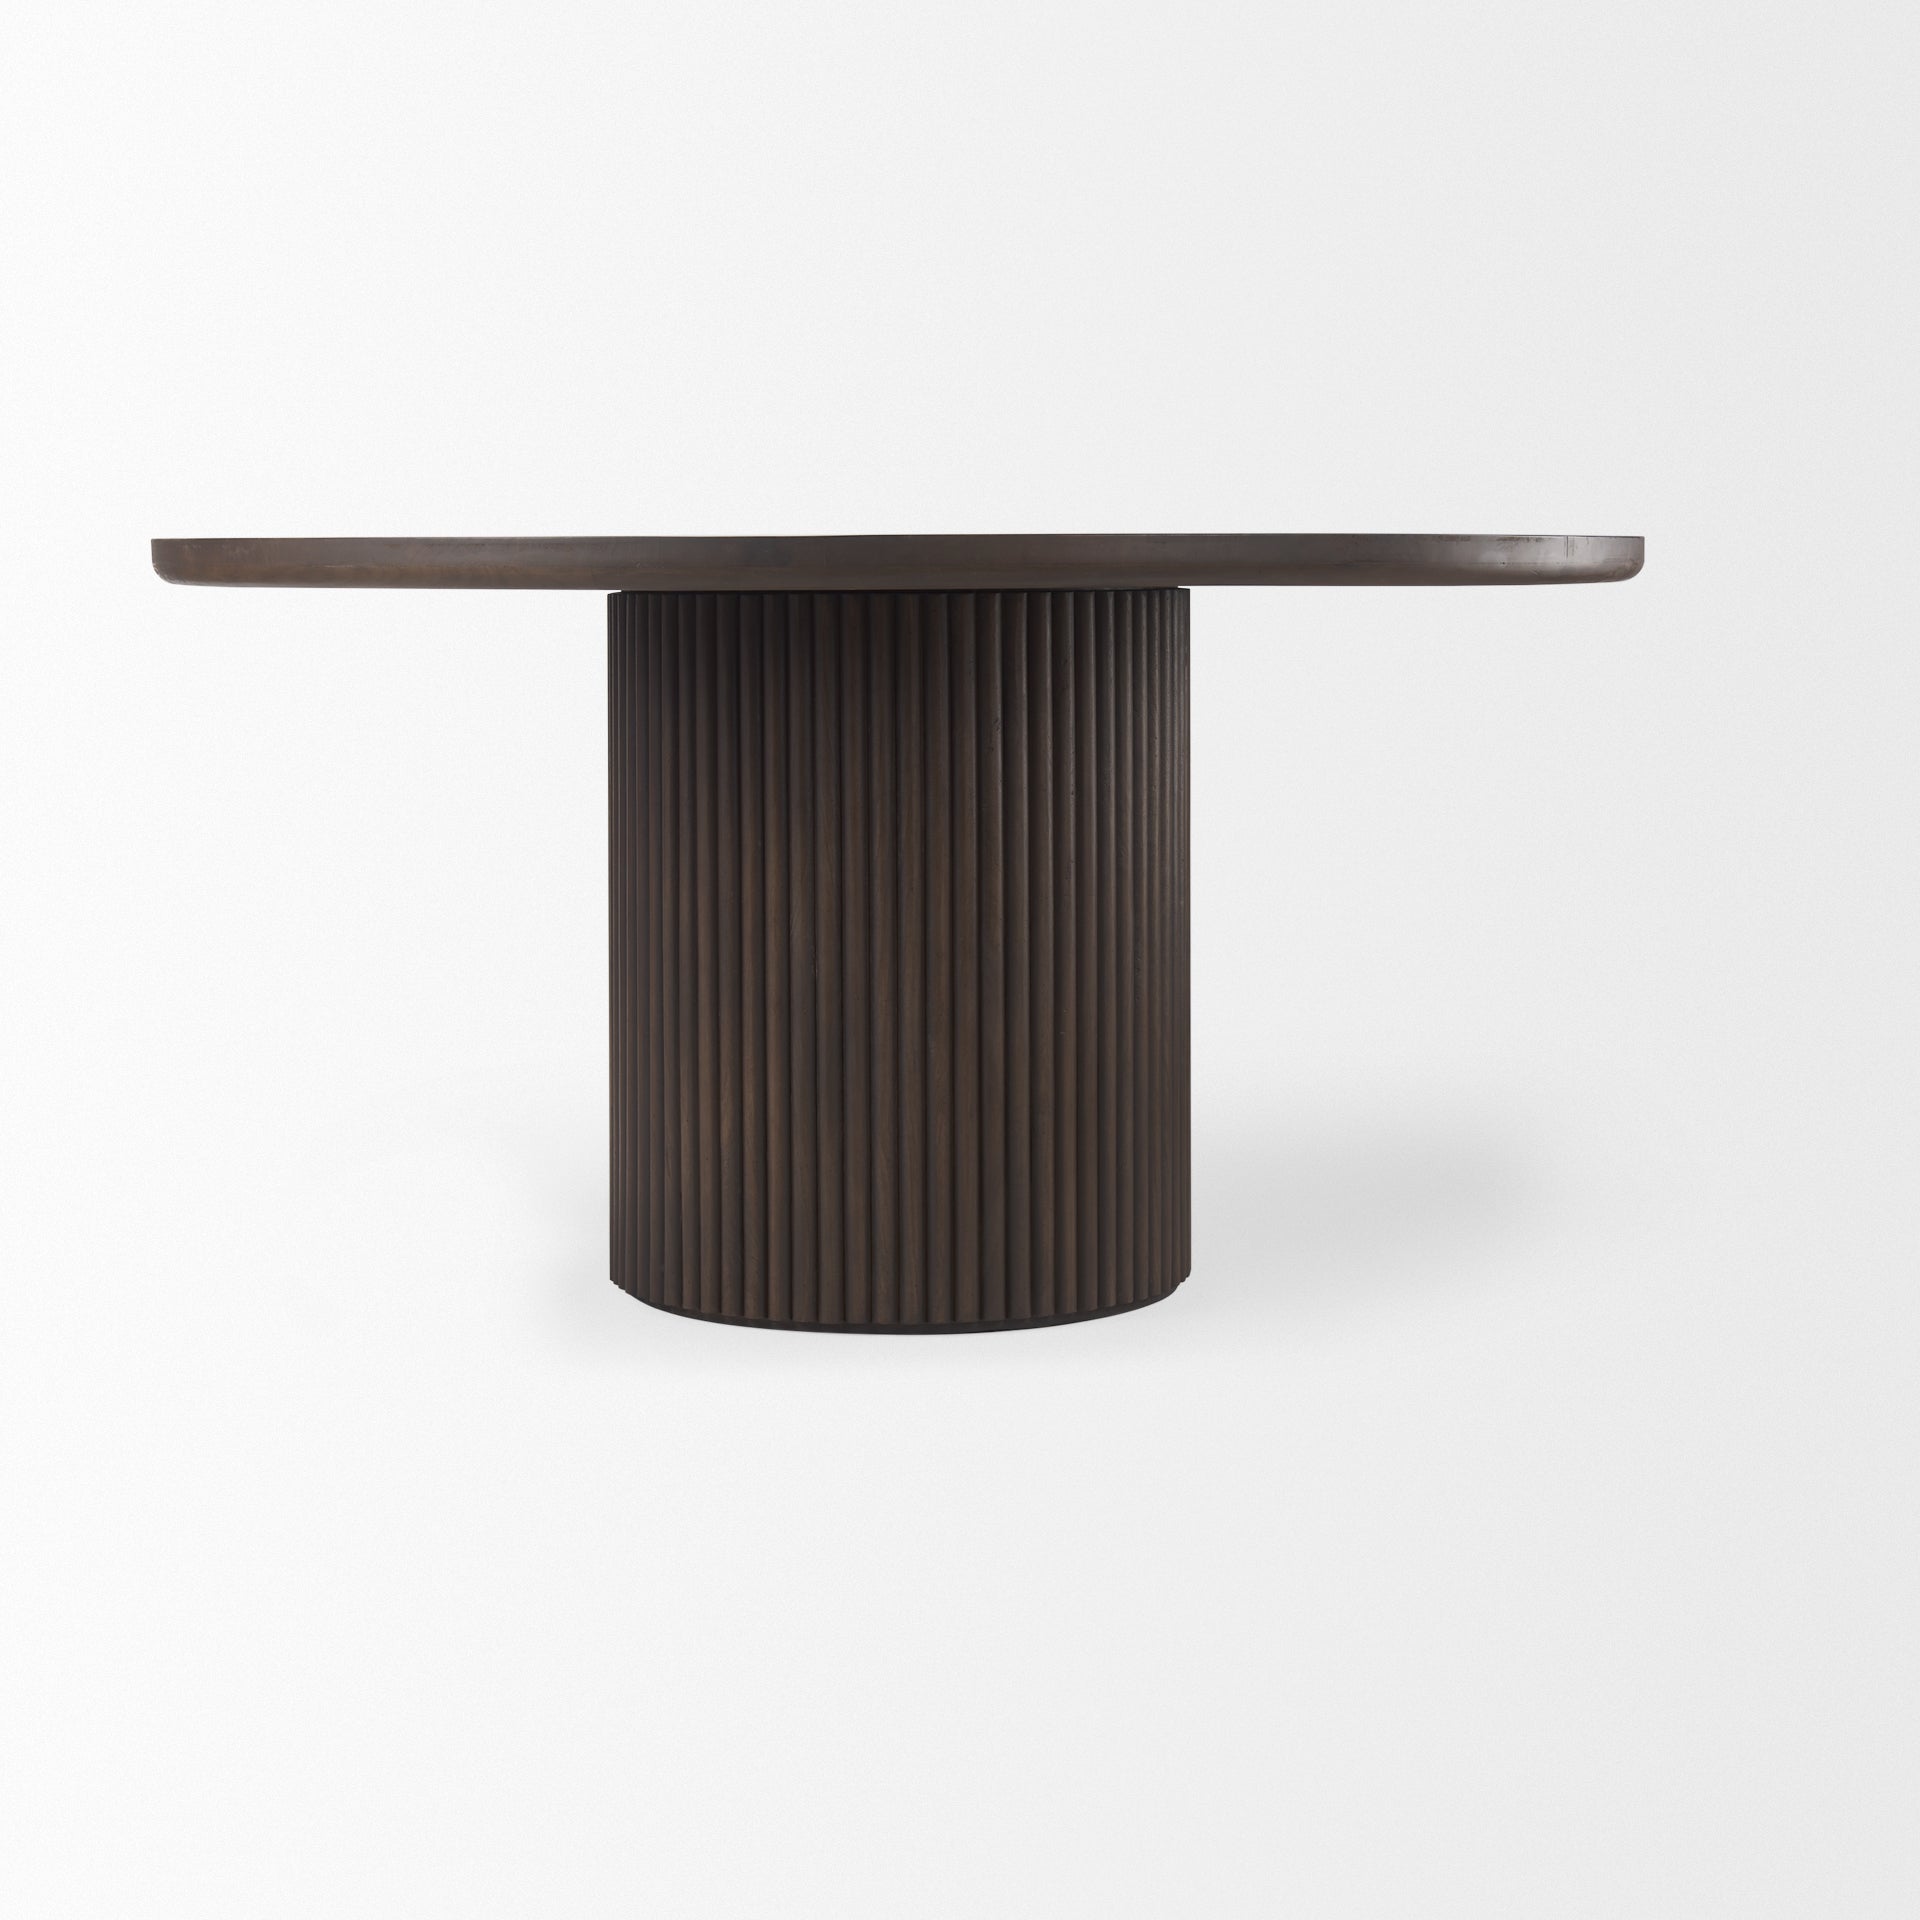 Terra Dining Table